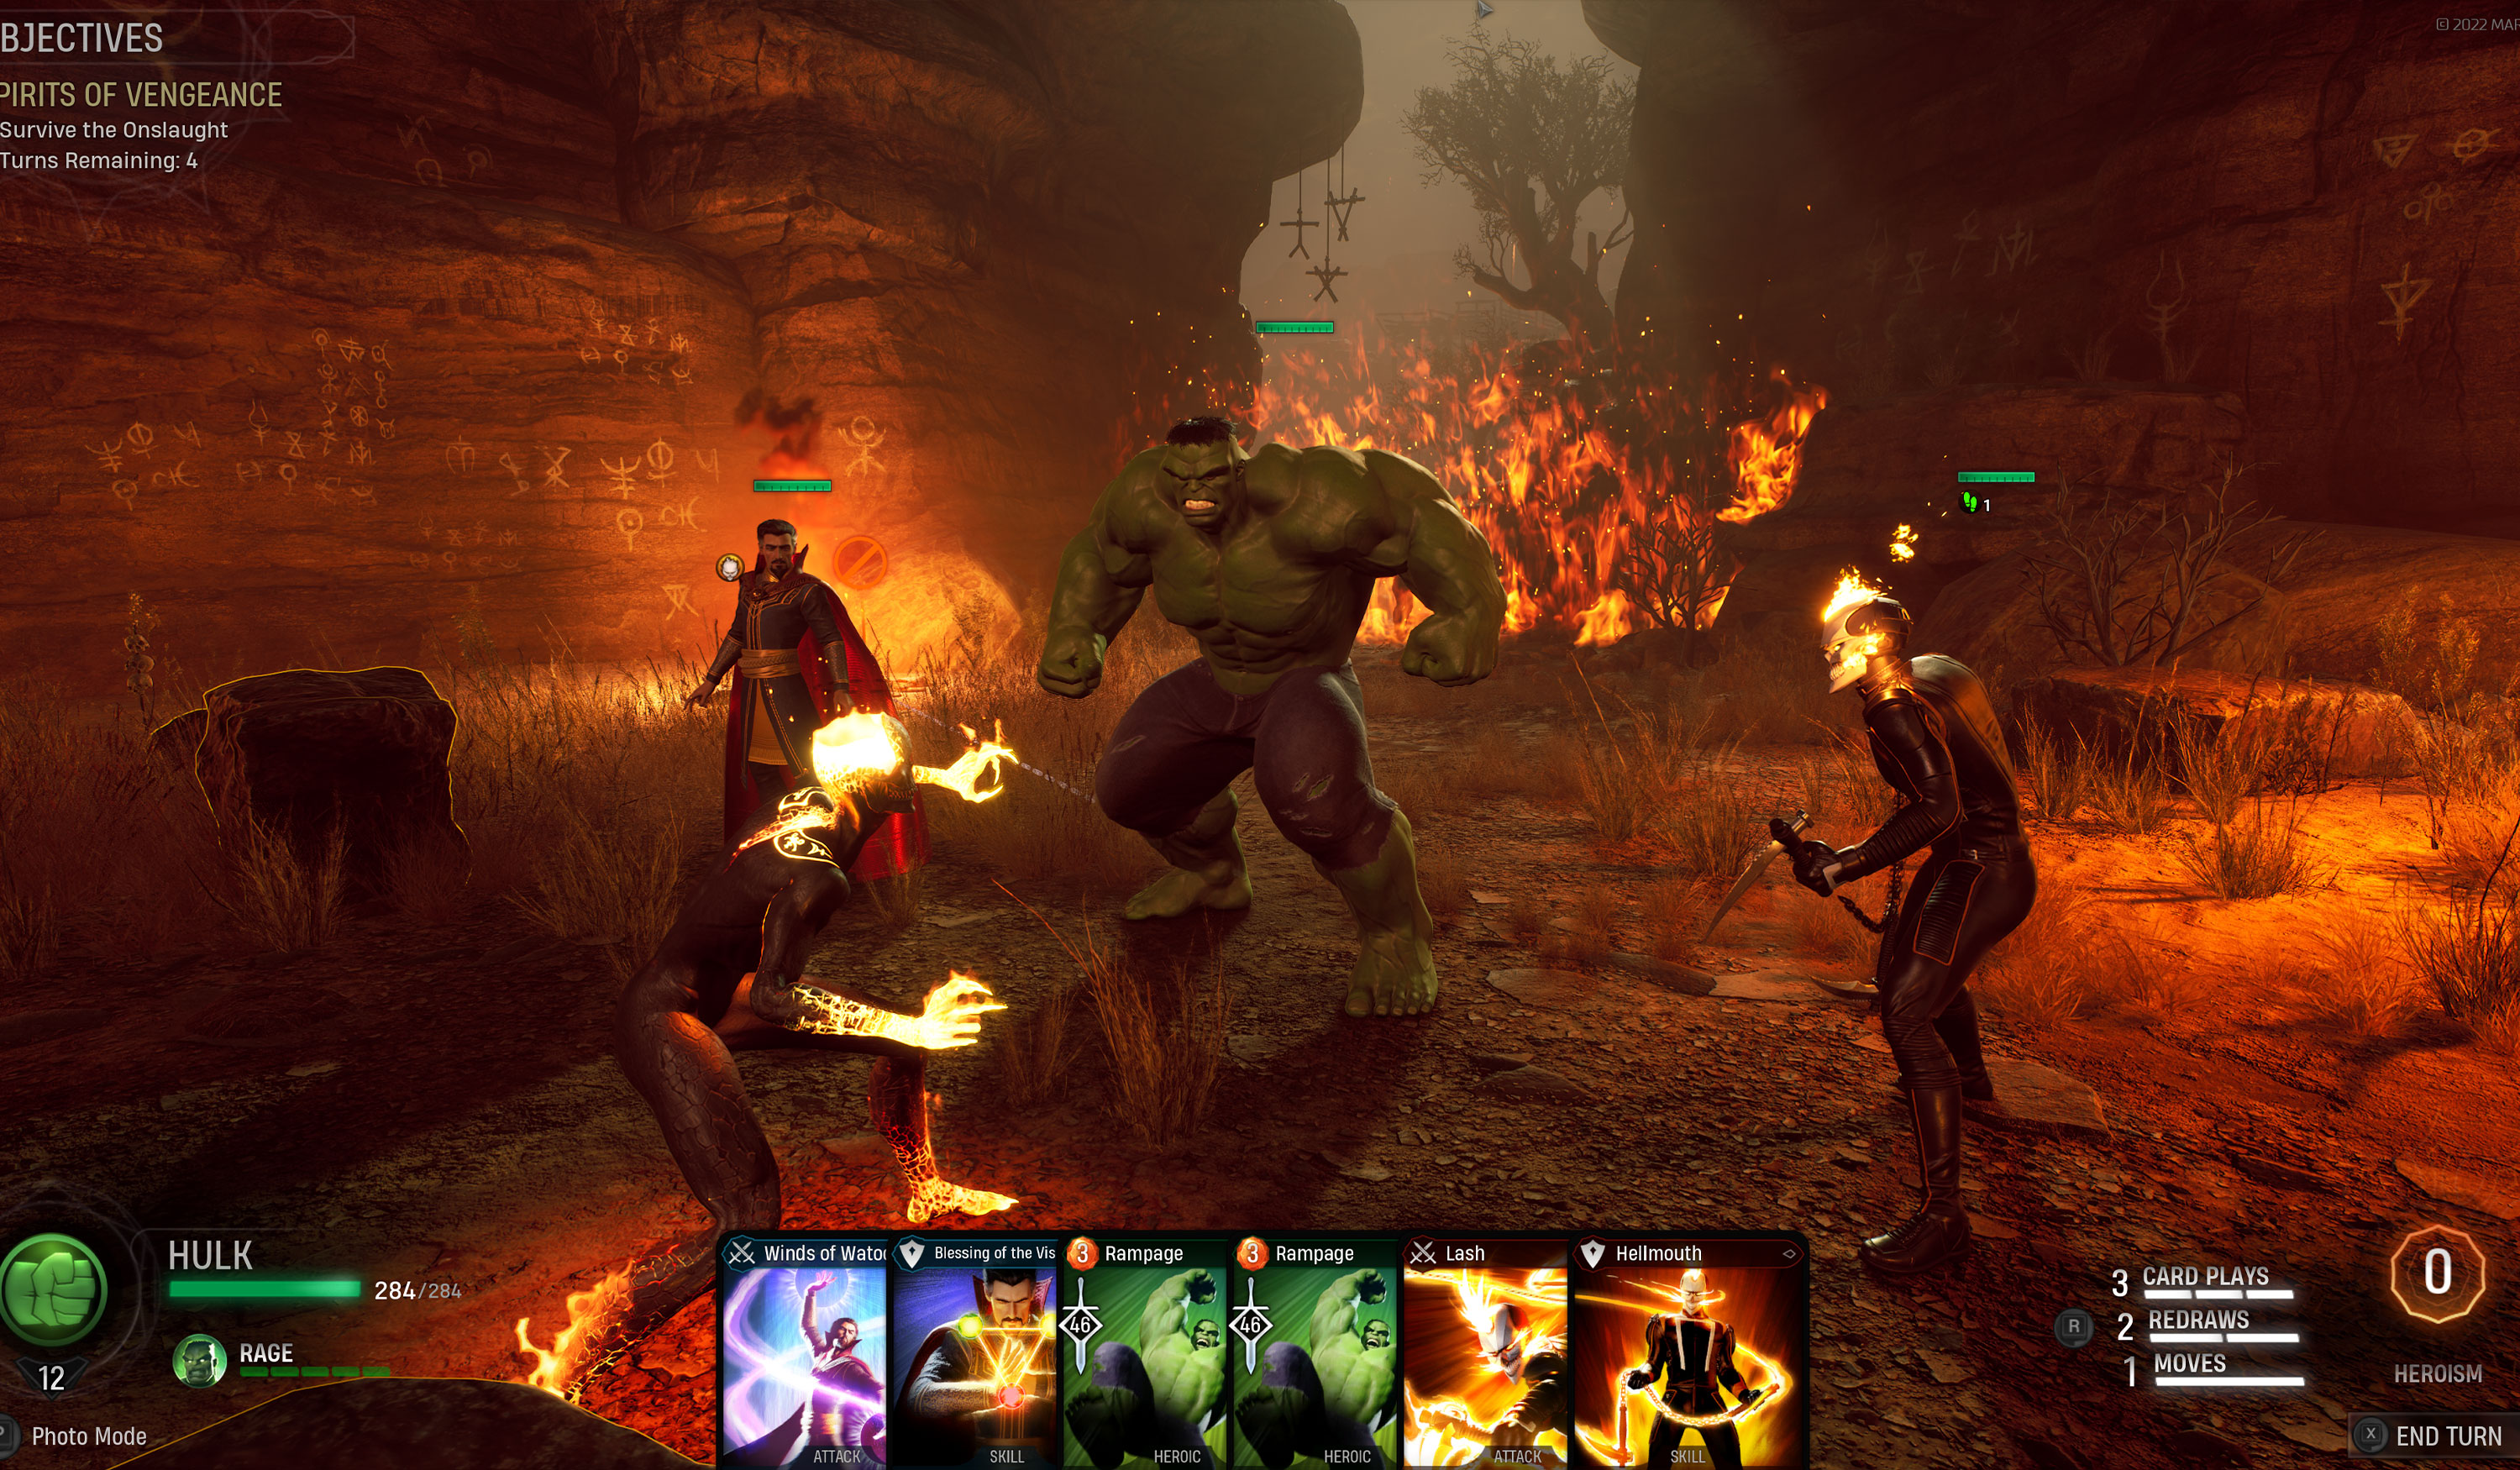 Marvel's Midnight Suns Gameplay Trailer Shows Off Card-Based Combat